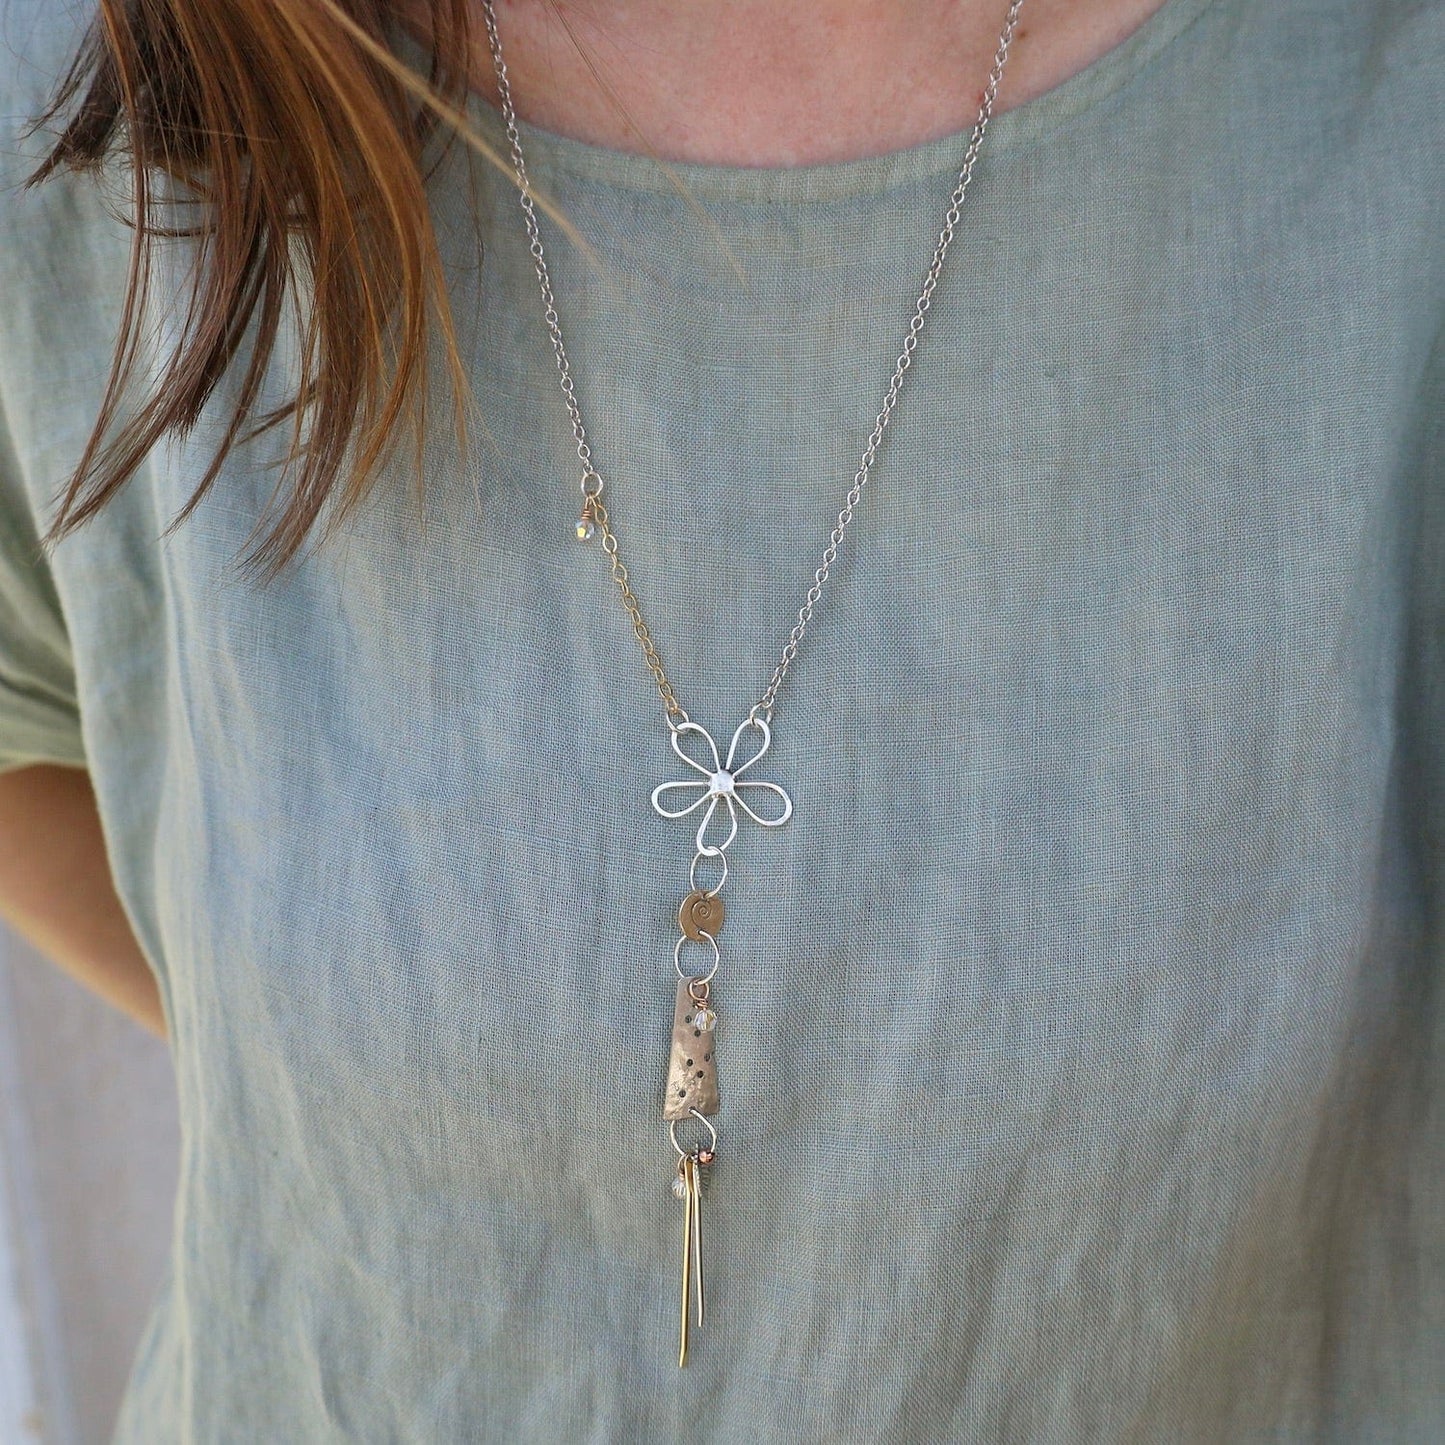 NKL Plant a Seed Necklace